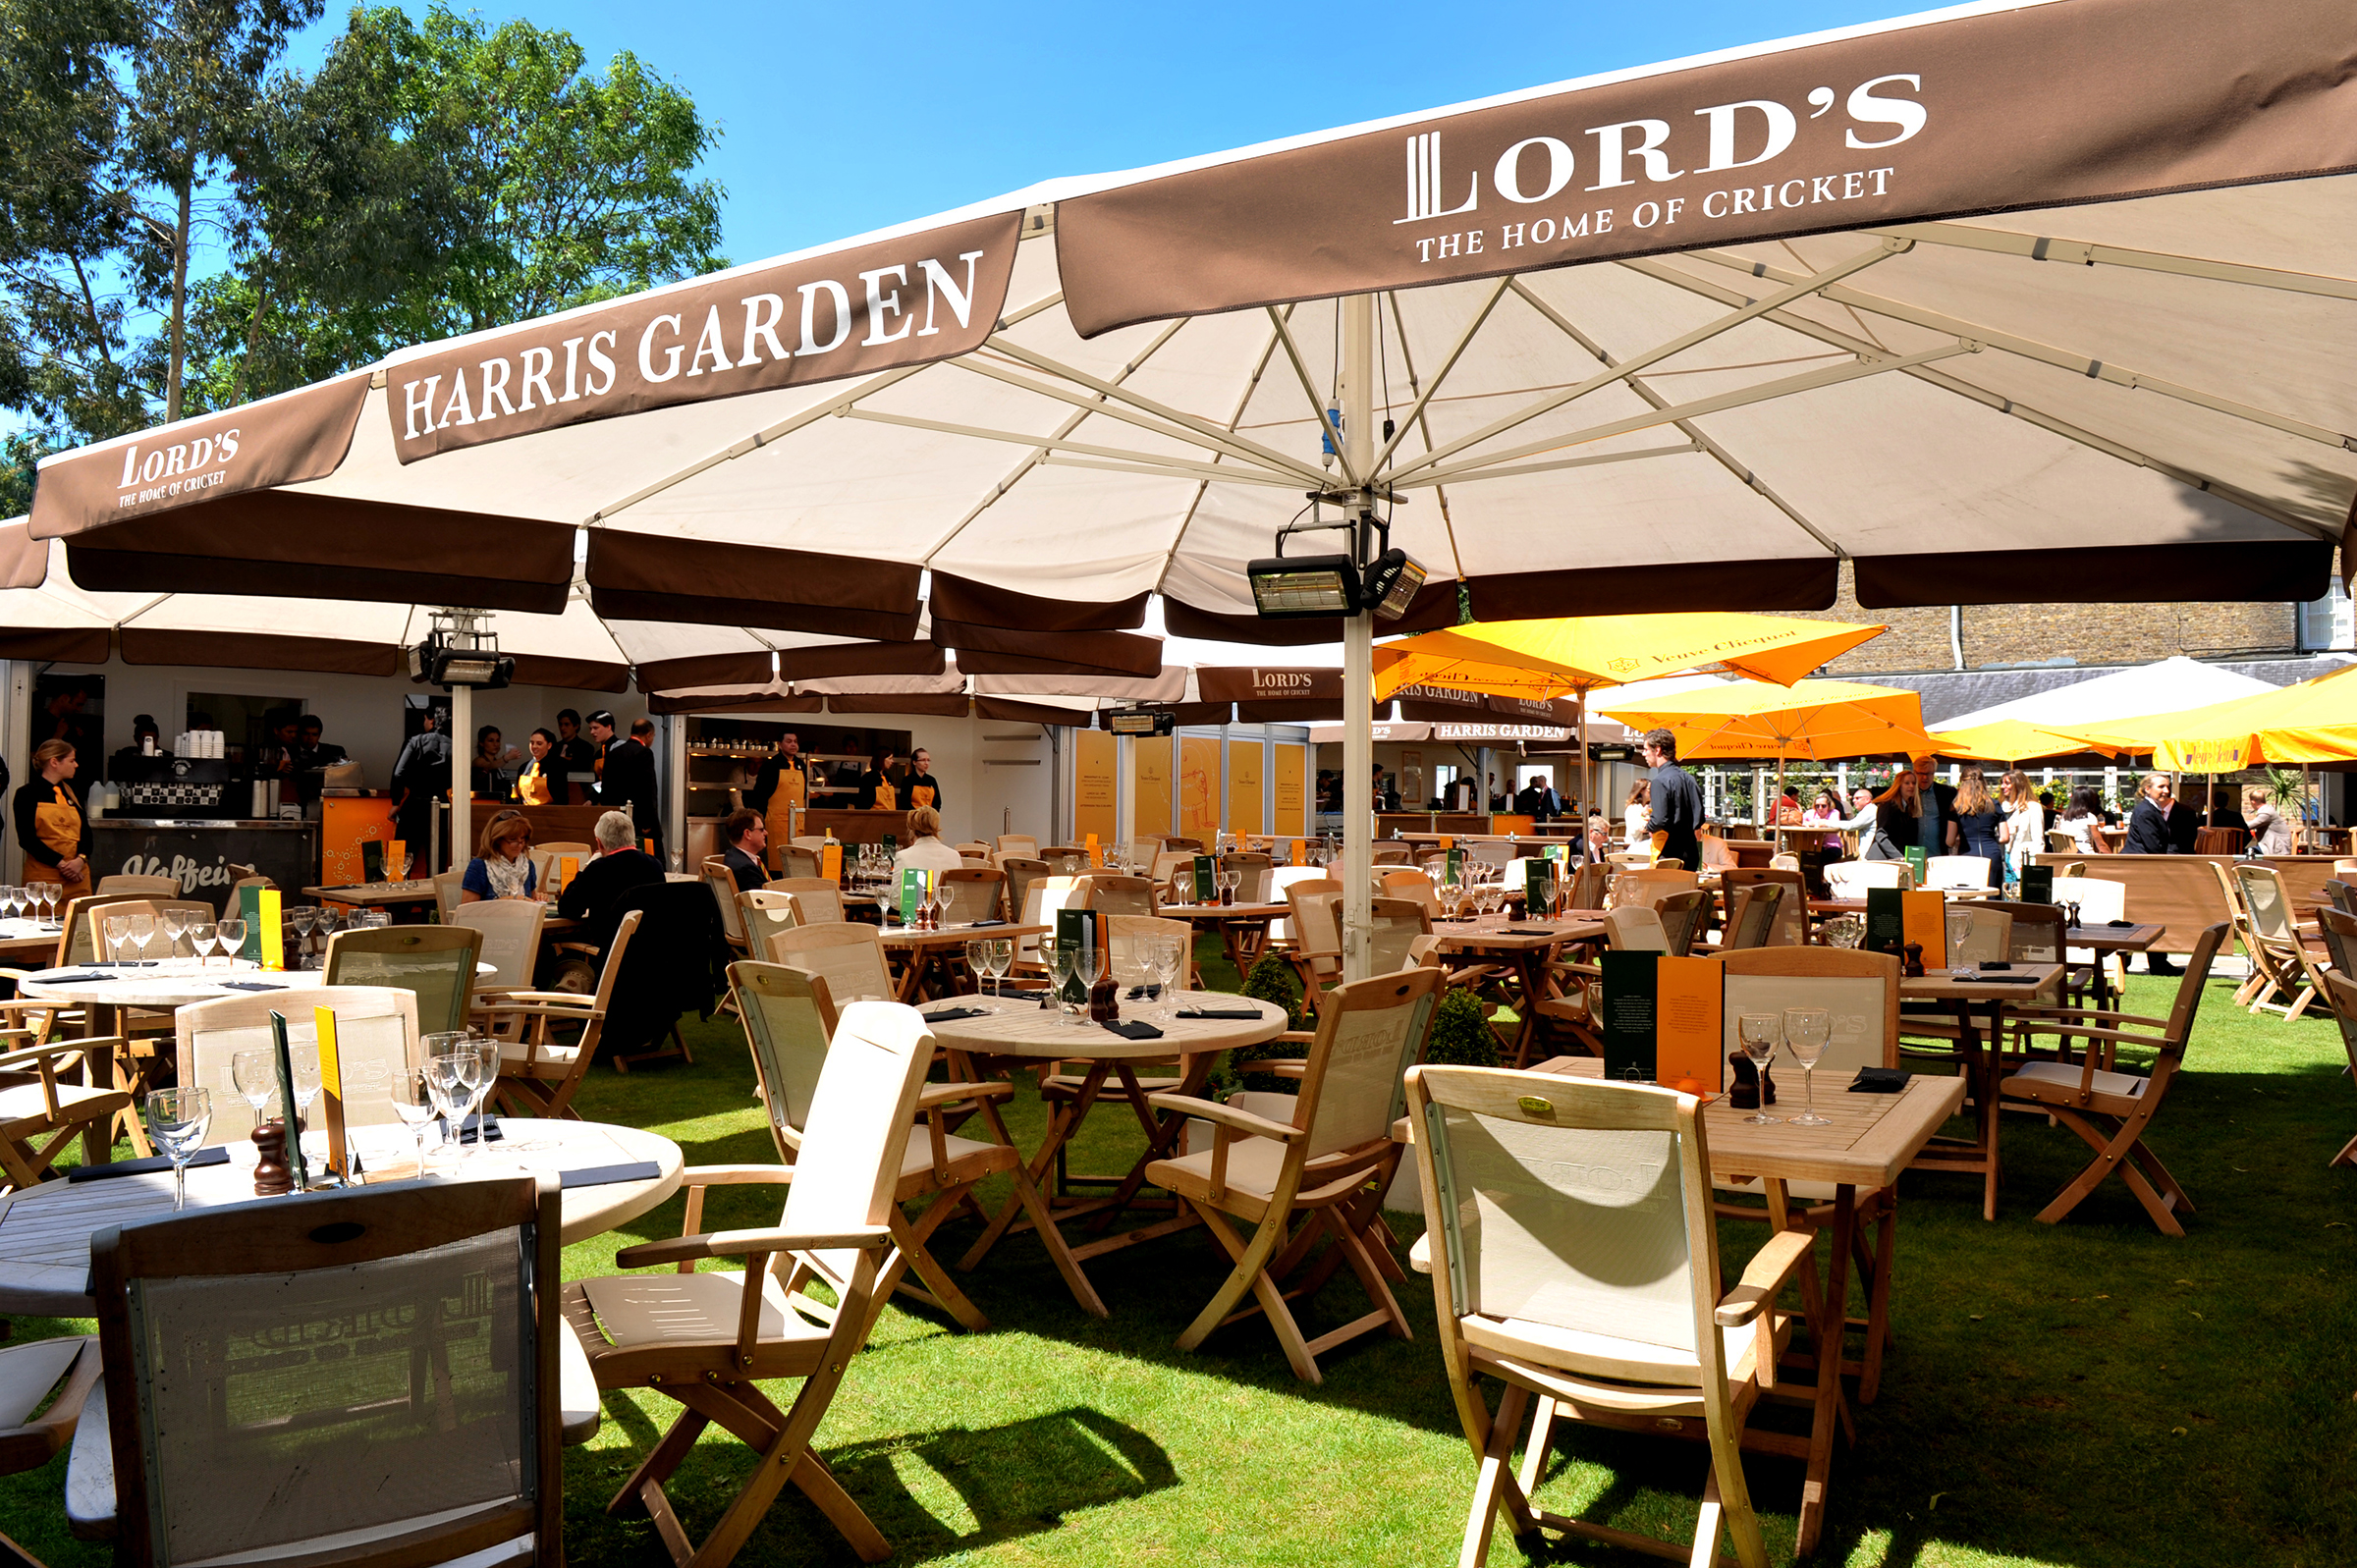 Lord’s Cricket Ground Summer Party Venue